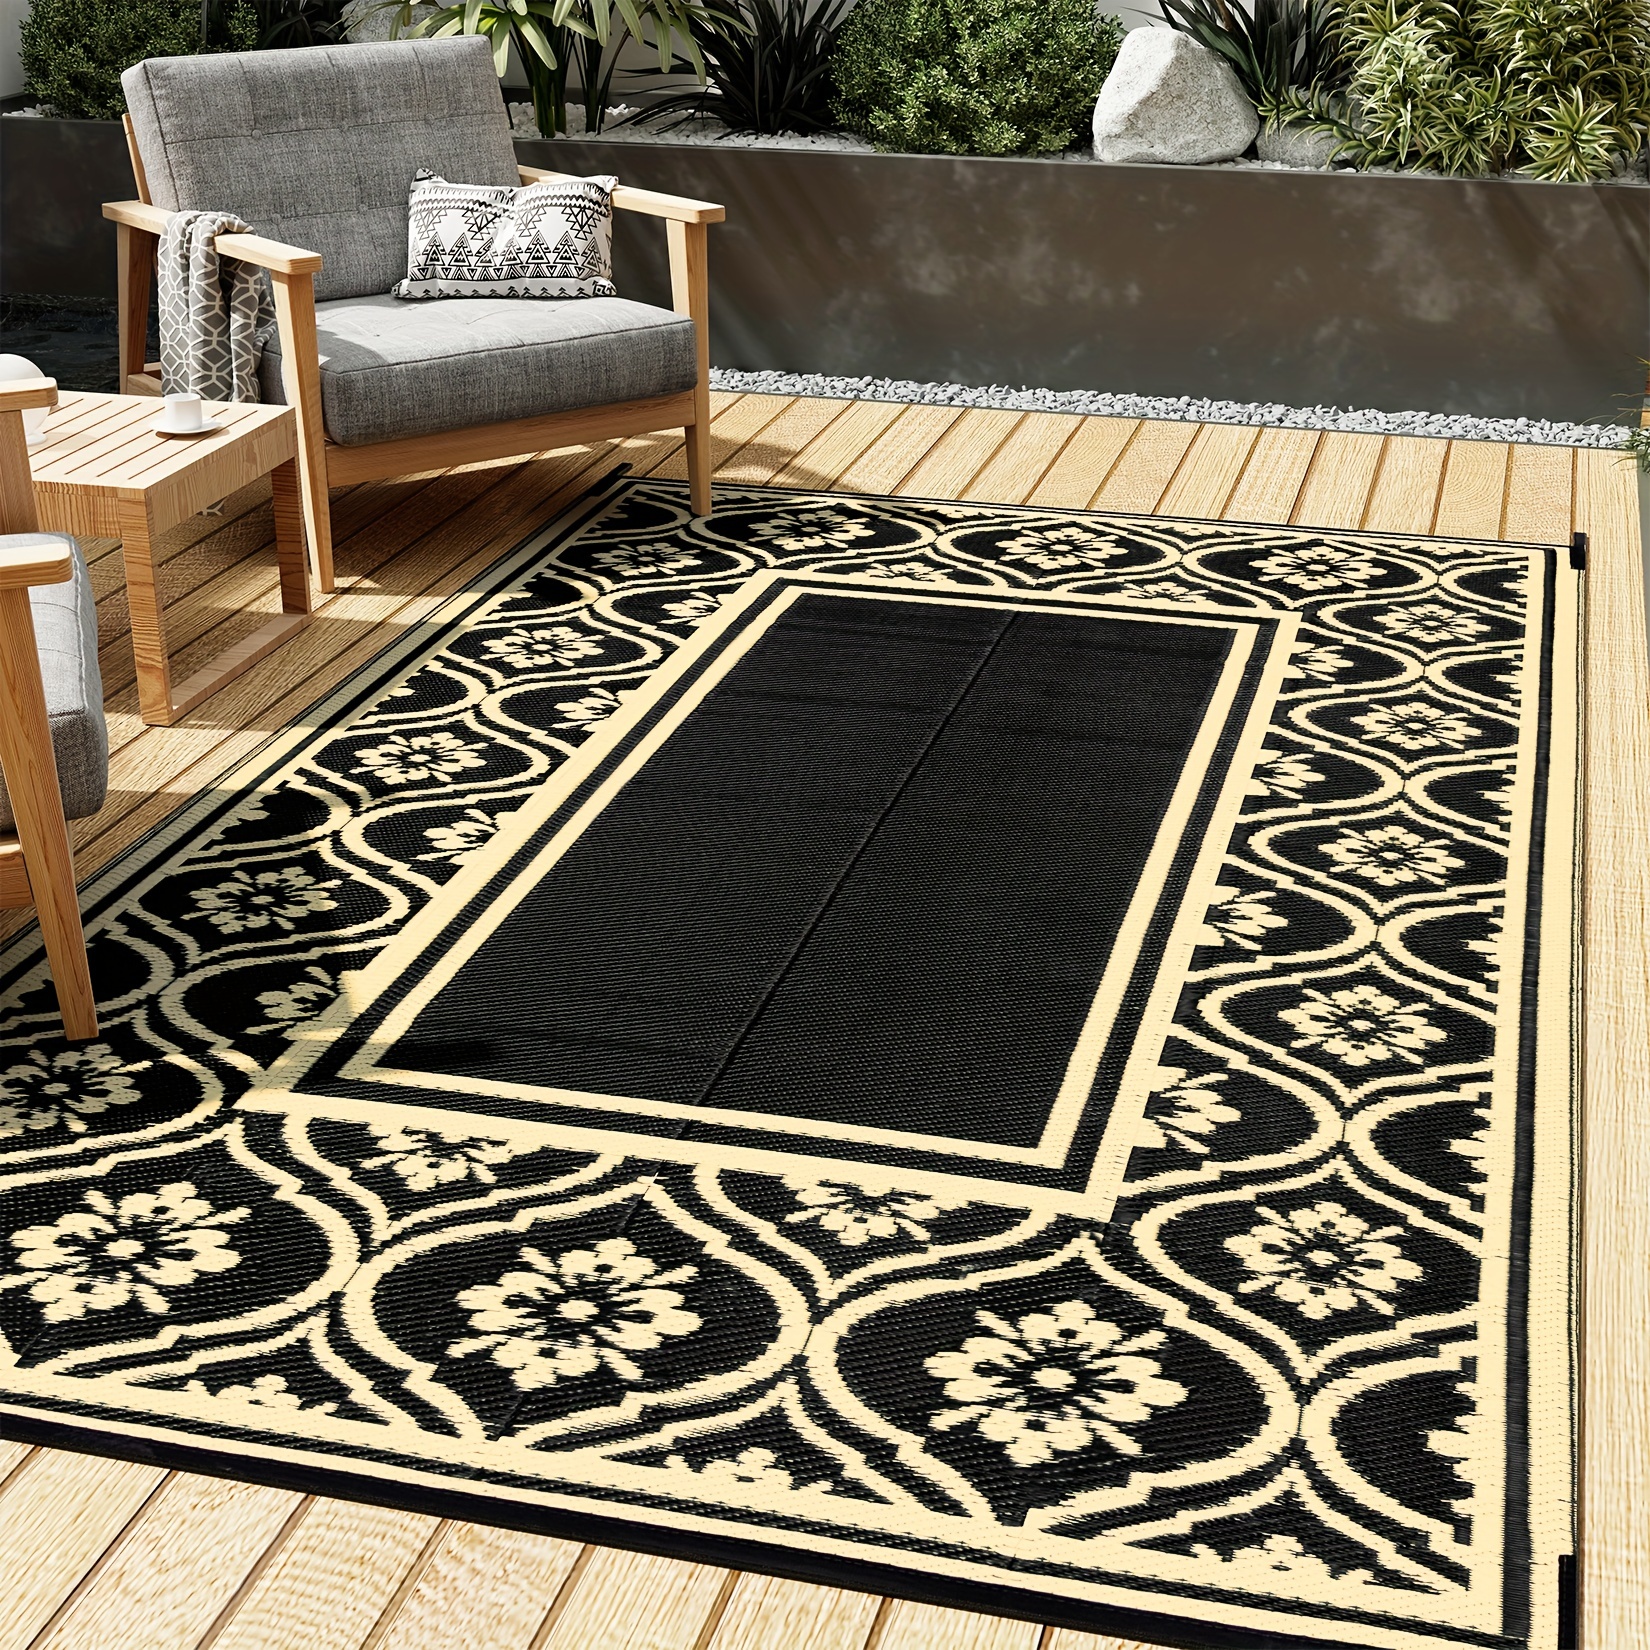 

1pc Outdoor Rug For Patio, 9'x12' Waterproof Uv Resistant Mat, Reversible Plastic Camping Rugs, Rv, Porch, Deck, Camper, Balcony, Backyard 5*8 Ft/ 6*9 Ft/ 8*10 Ft/ 9*12 Ft